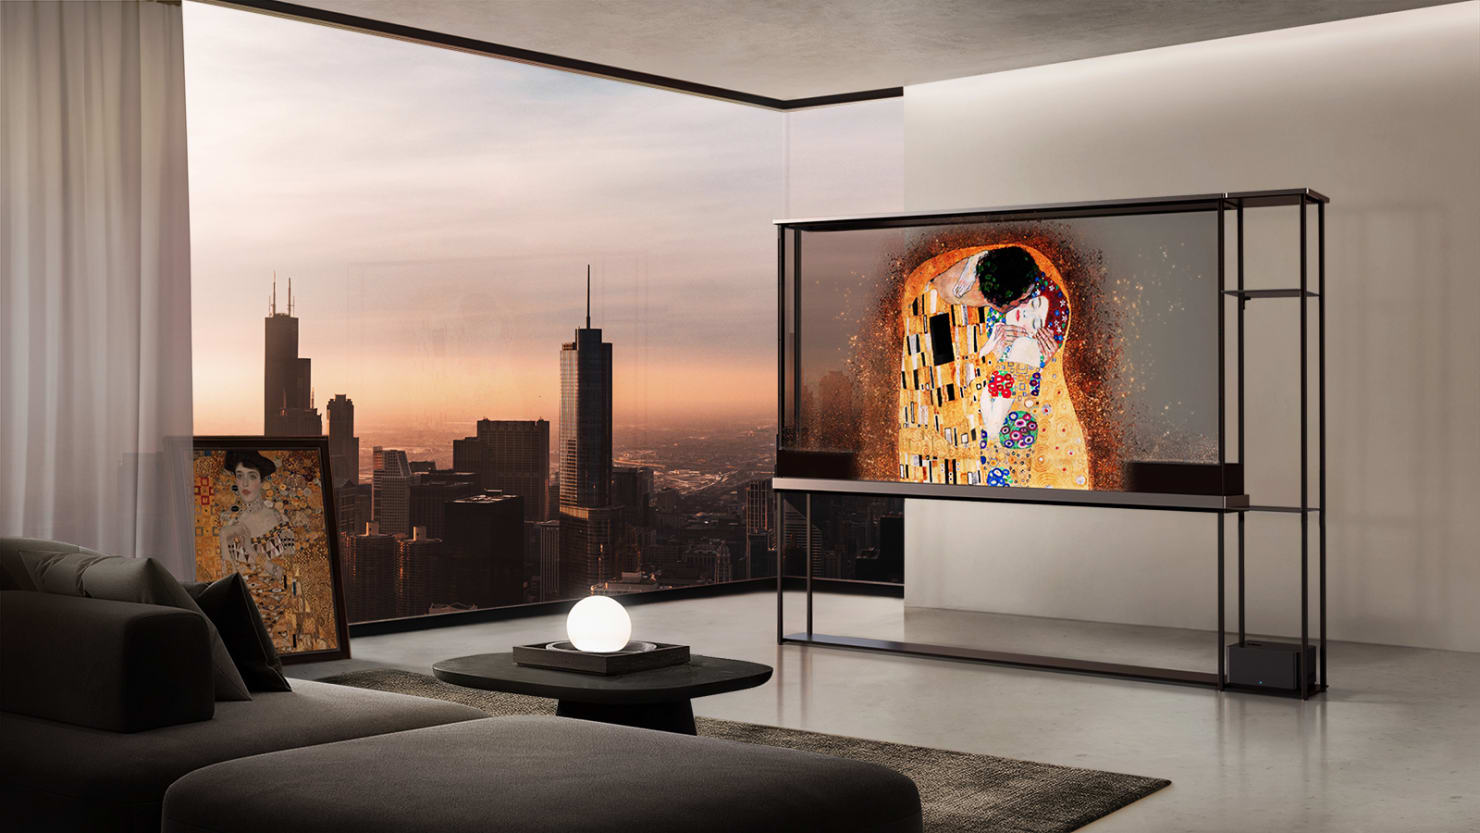 LG’s Transparent Television Breakthrough: Meet the Remarkable OLED Signature T TV.